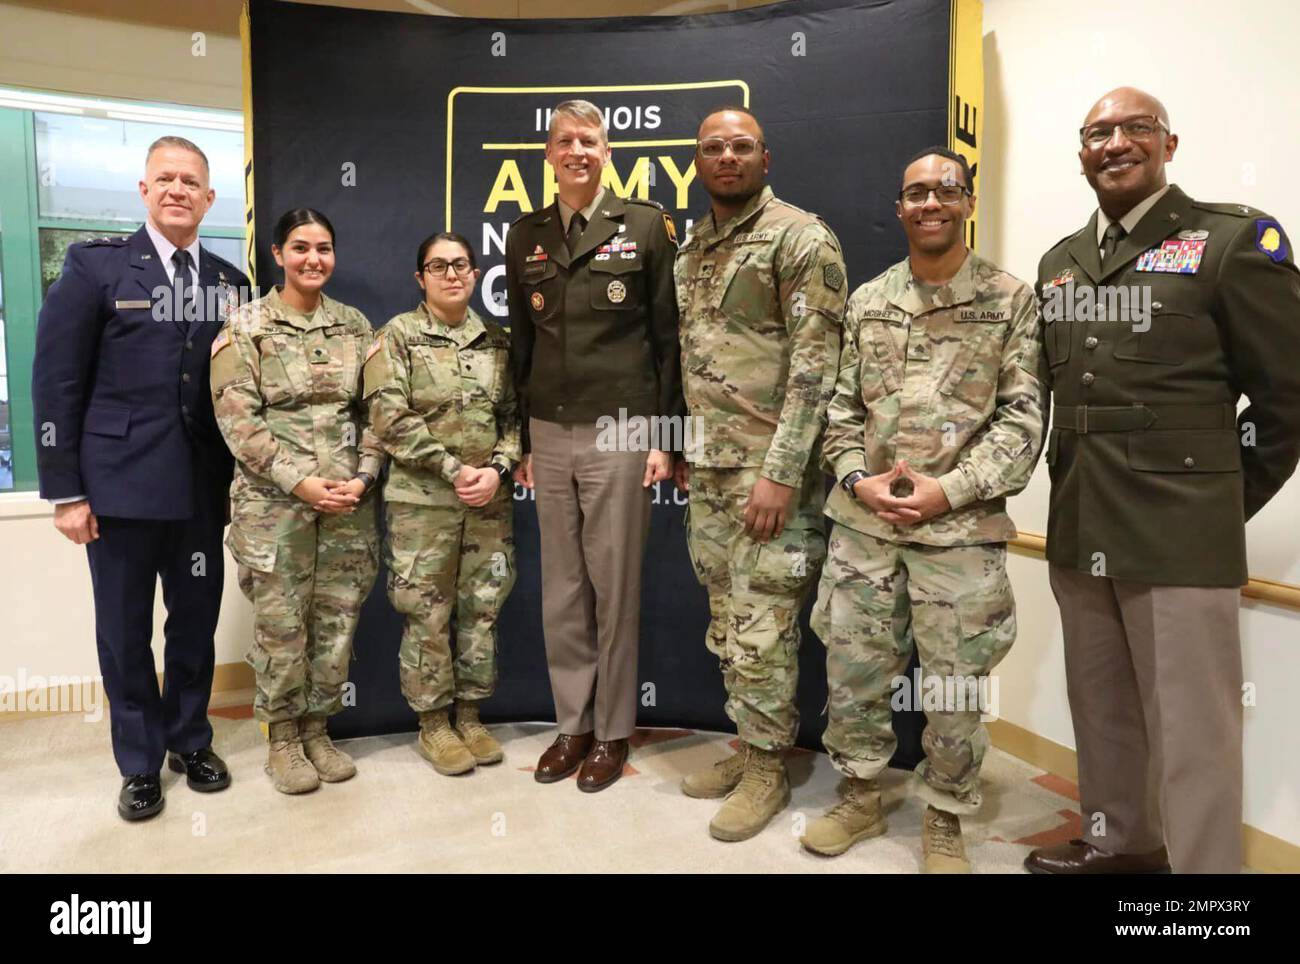 Air Force Maj. Gen. Rich Neely, the Adjutant General of Illinois and Commander of the Illinois National Guard, Spc. Clarissa Rios of Chicago, Spc. Lissette Alejandrez of Bensenville, Gen. Daniel Hokanson, Chief of the U.S. National Guard Bureau, Spc. Joshua Davenport of Chicago, Sgt. Joseph McGhee of Chicago and Brig. Gen. Rodney Boyd, Assistant Adjutant General - Army and Commander of the Illinois Army National Guard  (left to right) pose for a photograph at Chicago State University in Chicago. All  of the enlisted Soldiers are assigned to the 1970th Quartermaster Company out of North Riversi Stock Photo